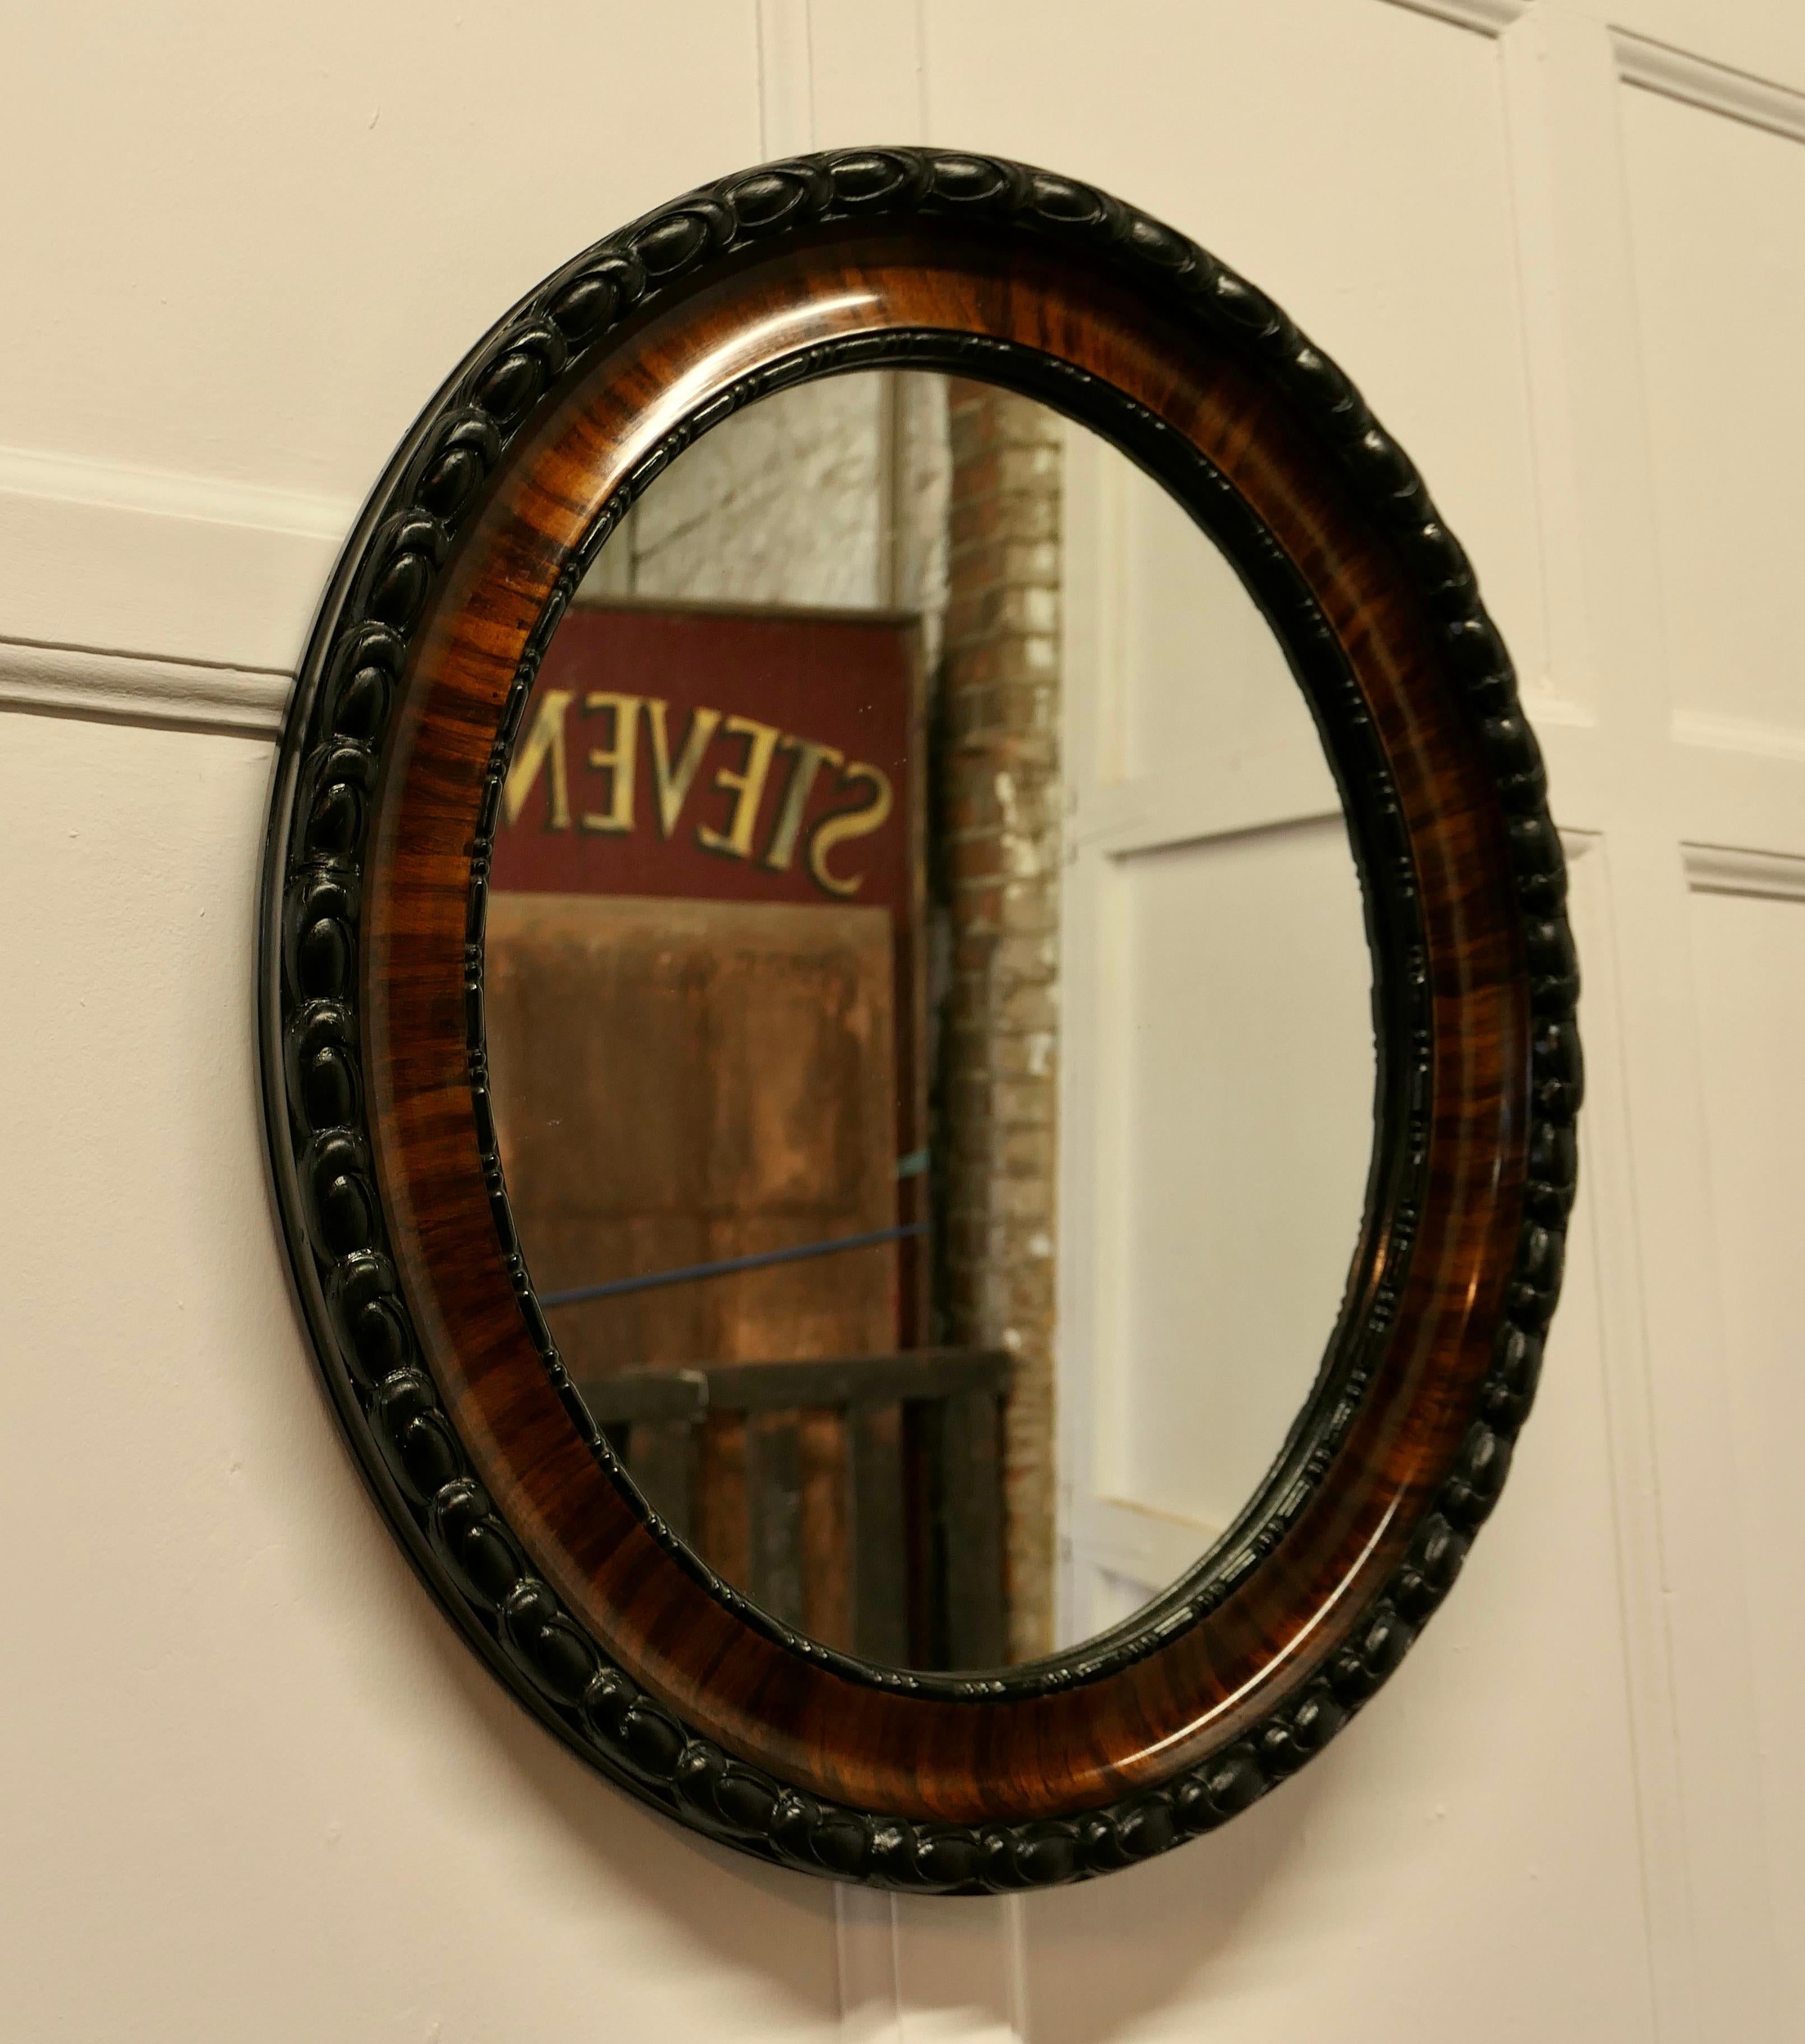 Edwardian scumble finish oval mirror.

This Mirror has a 3” wide moulded oval frame, this has a Scumble simulated Walnut finish, and a heavy Rope carved edge 
The Oval frame is in good attractive condition as is the original Oval looking